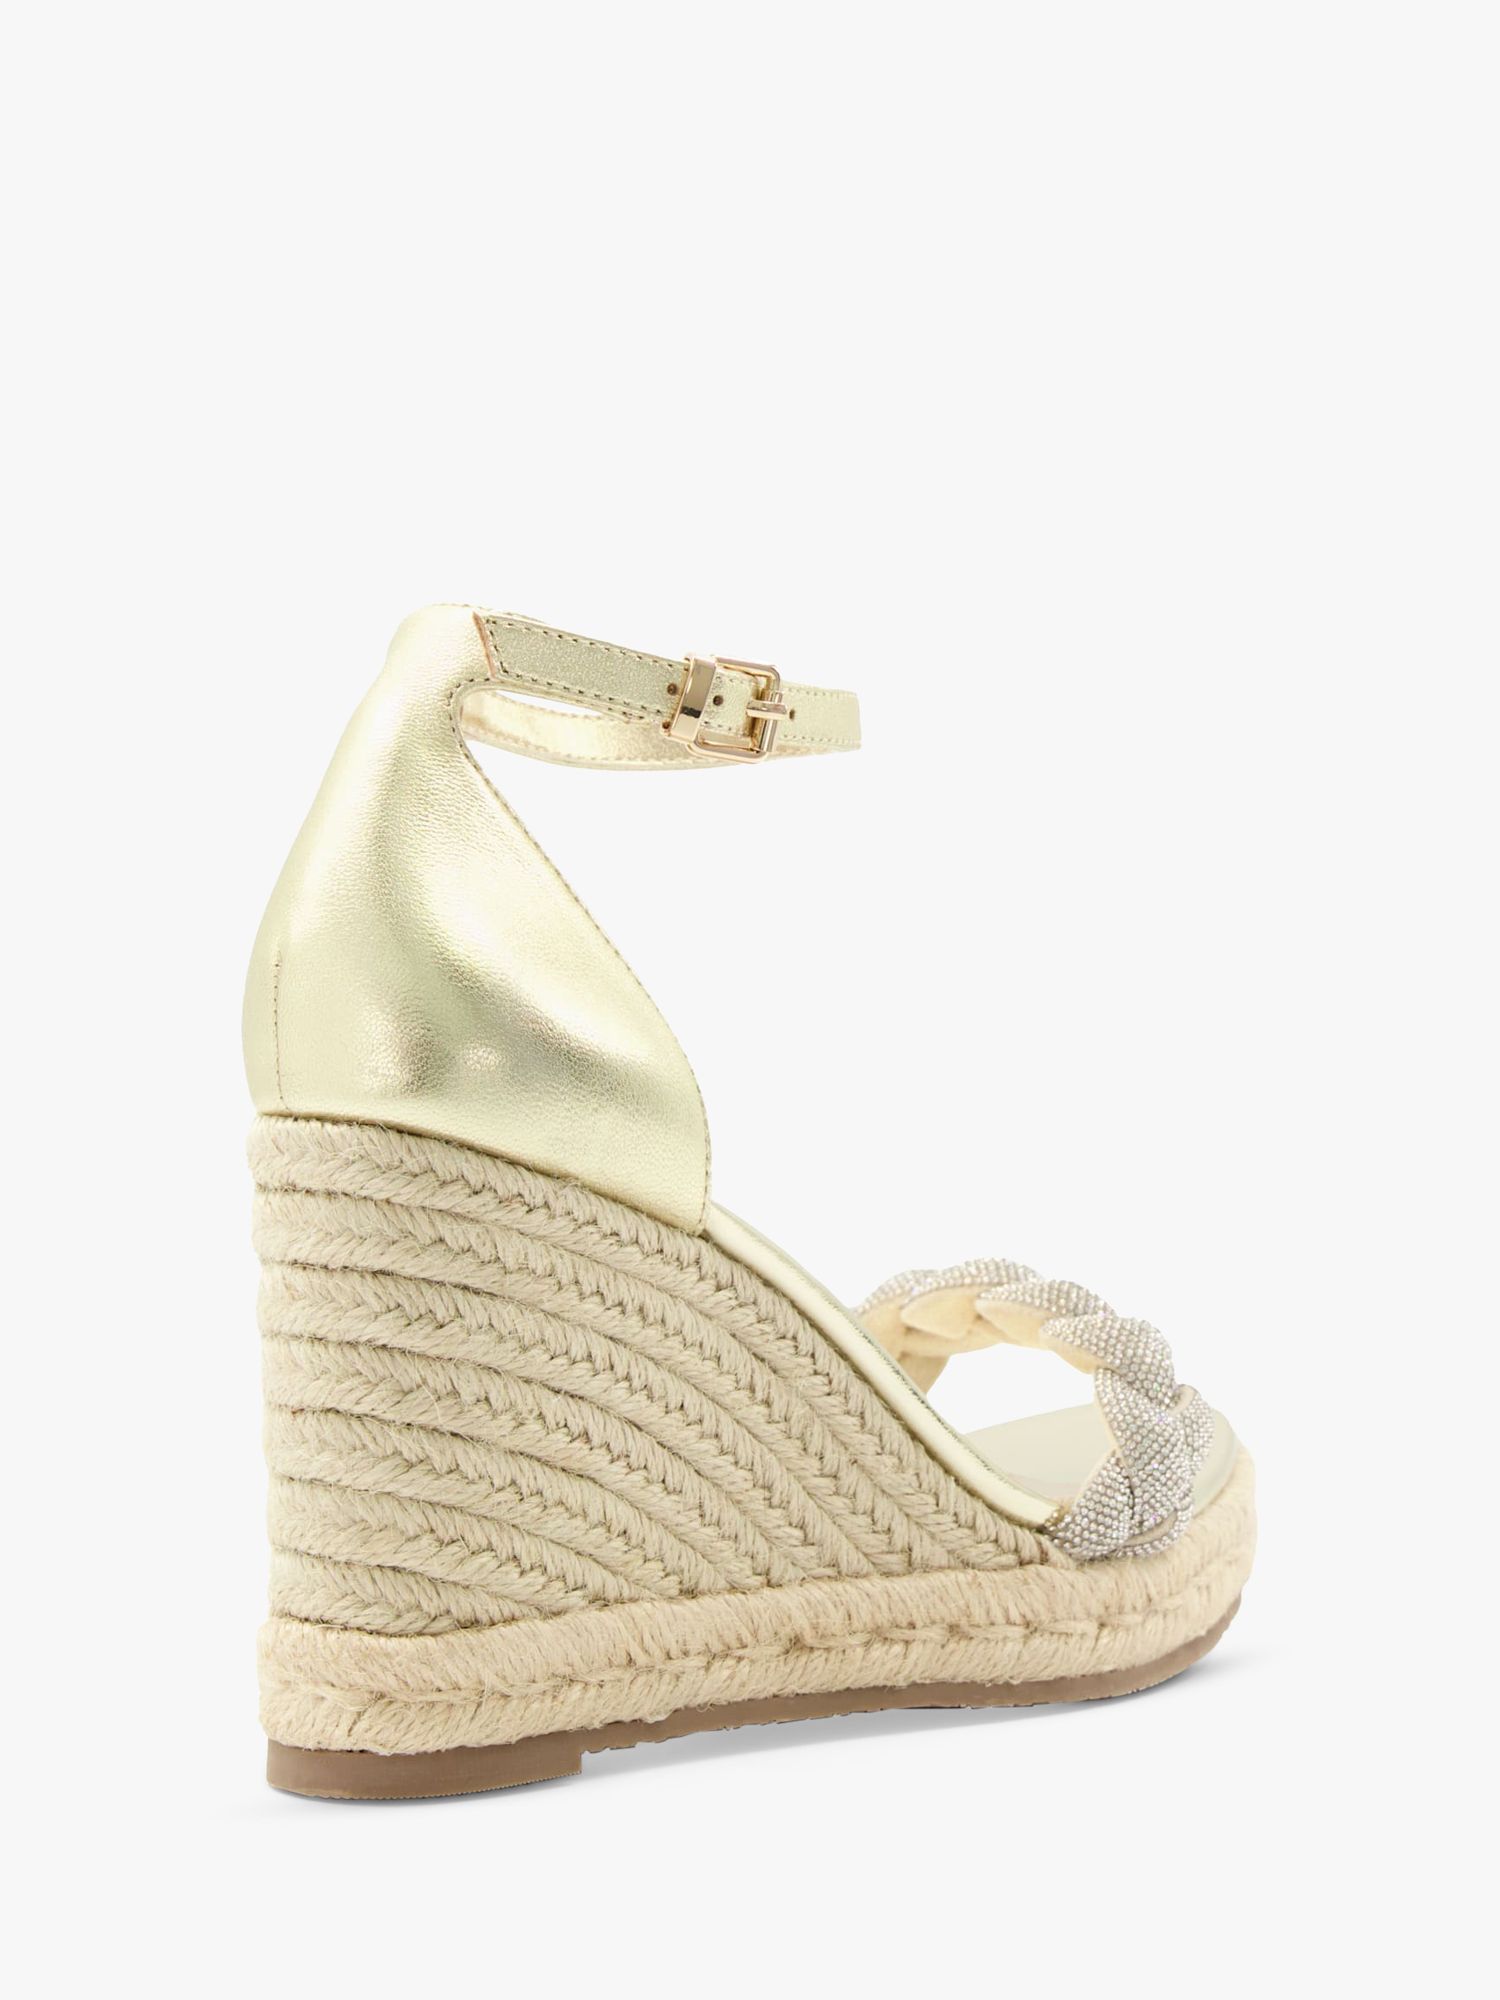 Dune Kingdom Leather Wedge Sandals, Gold at John Lewis & Partners